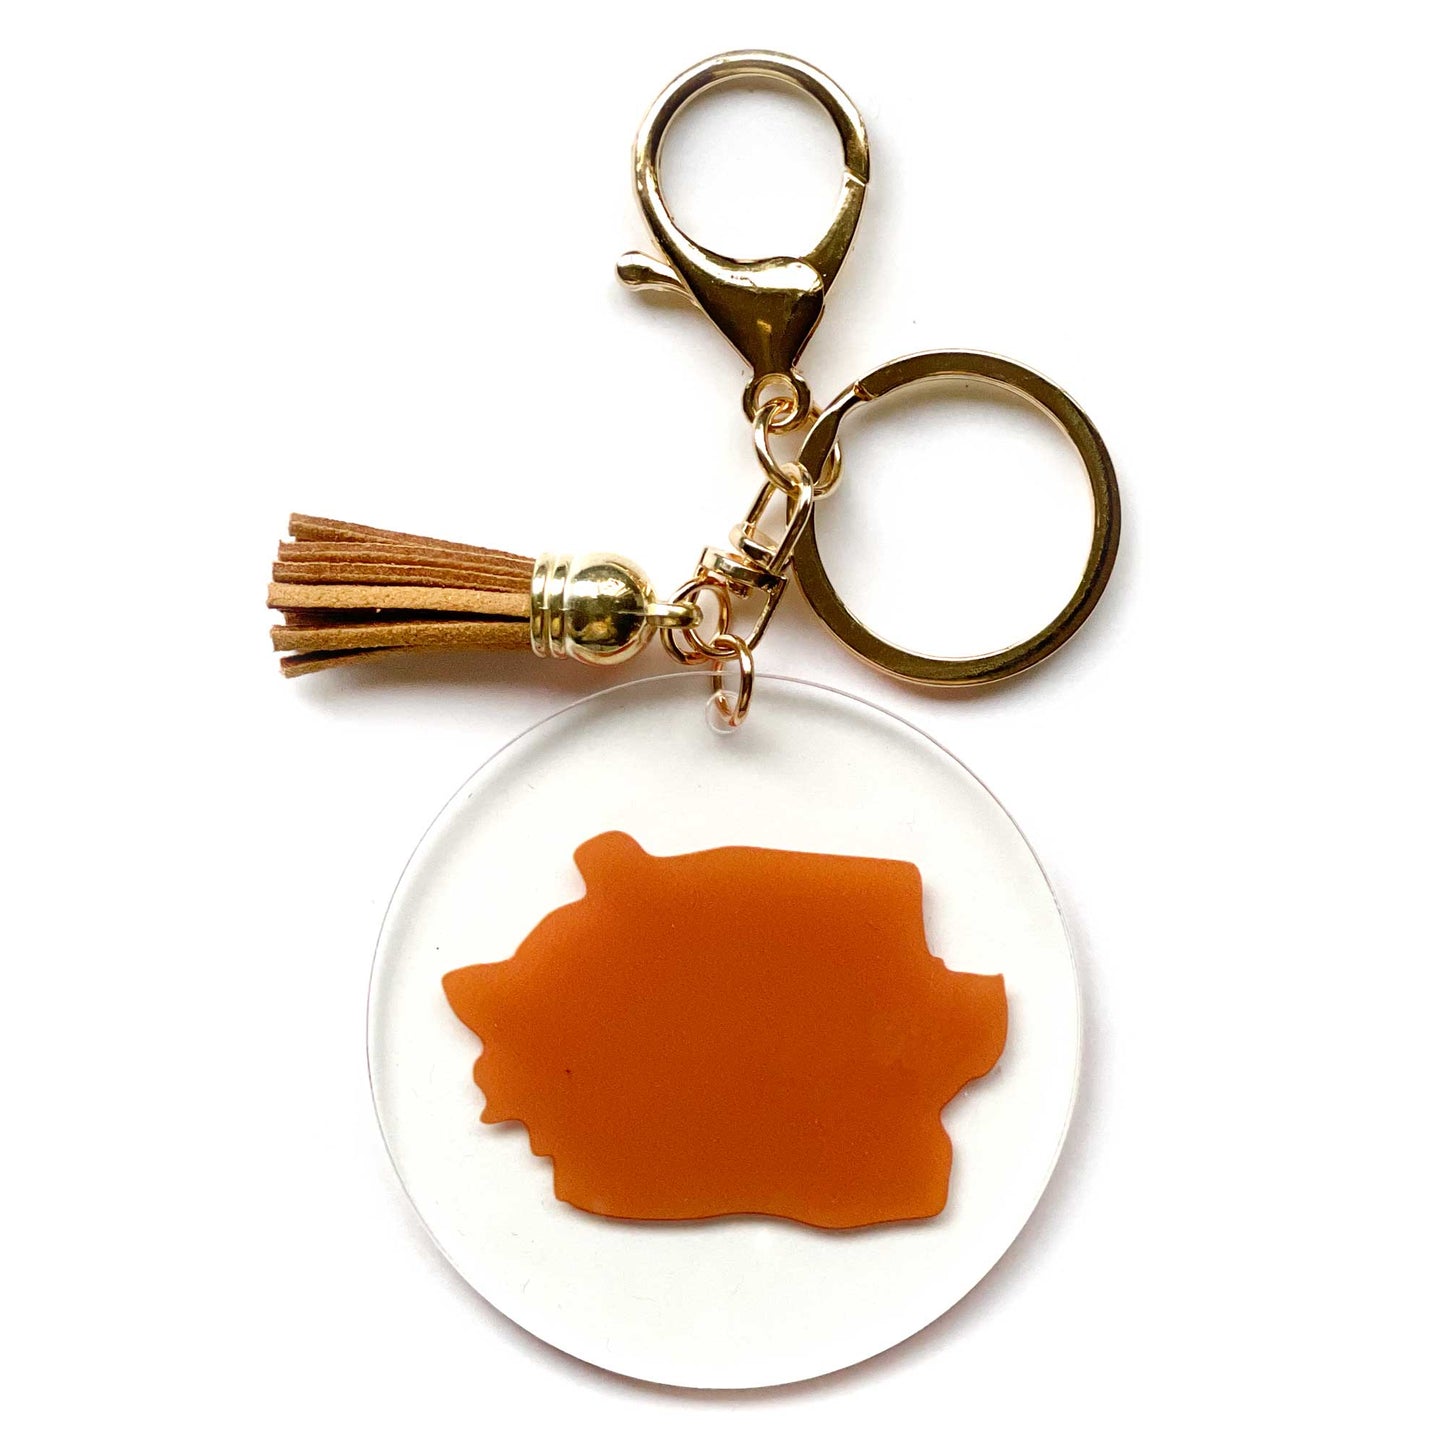 Paint Brush Printed Acrylic Keychain | Gold | Craft Blank for Cricut, Cameo Silhouette | Brown, Tan